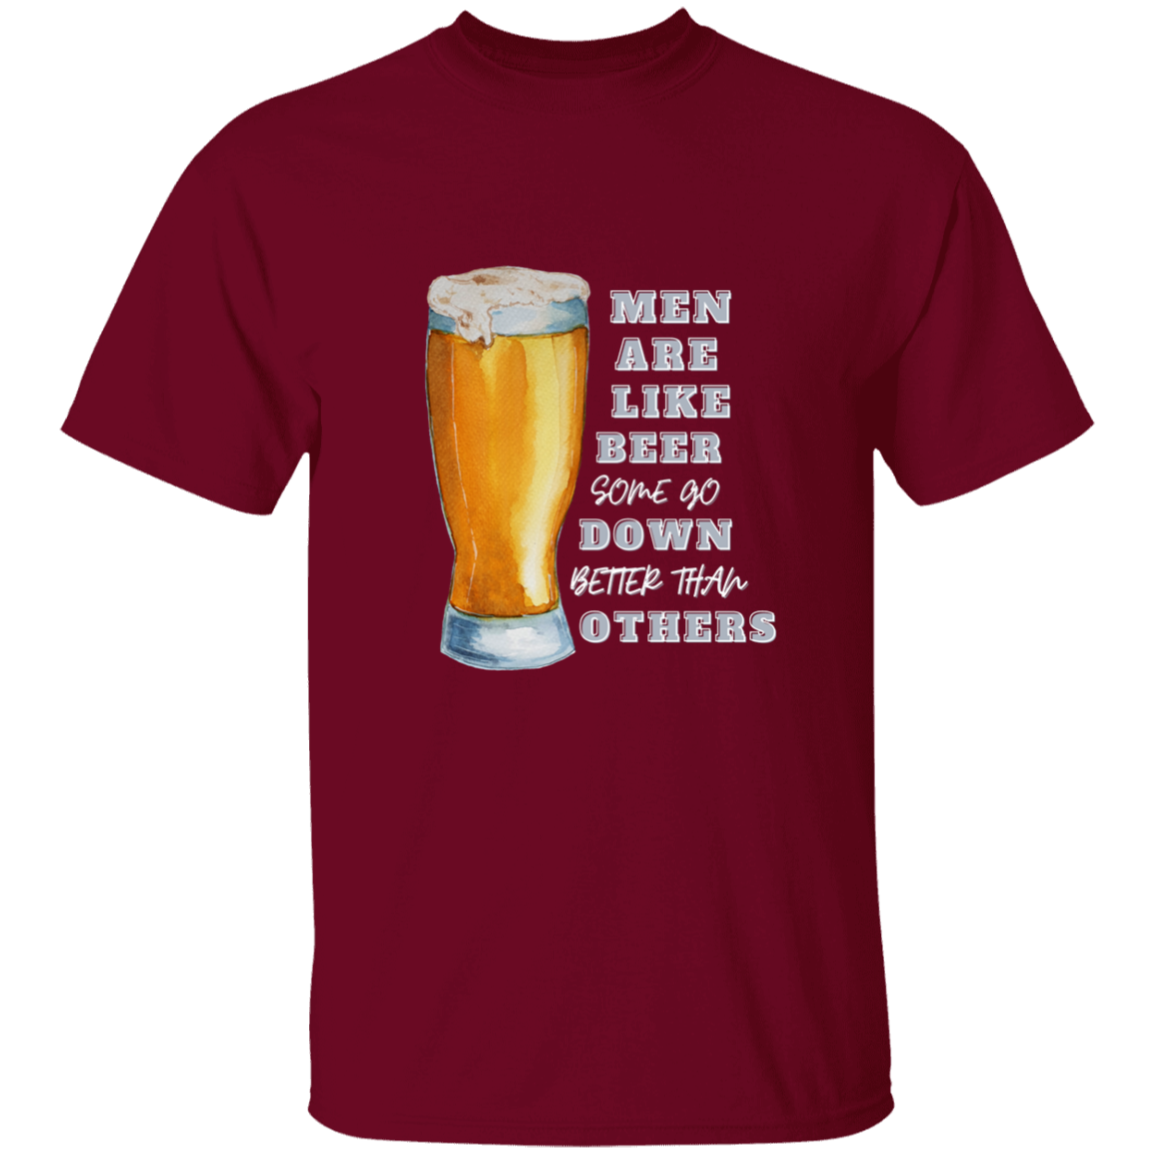 Men Are Like Beer, Some Go Down Better Than Others - Thoughtful Blossom